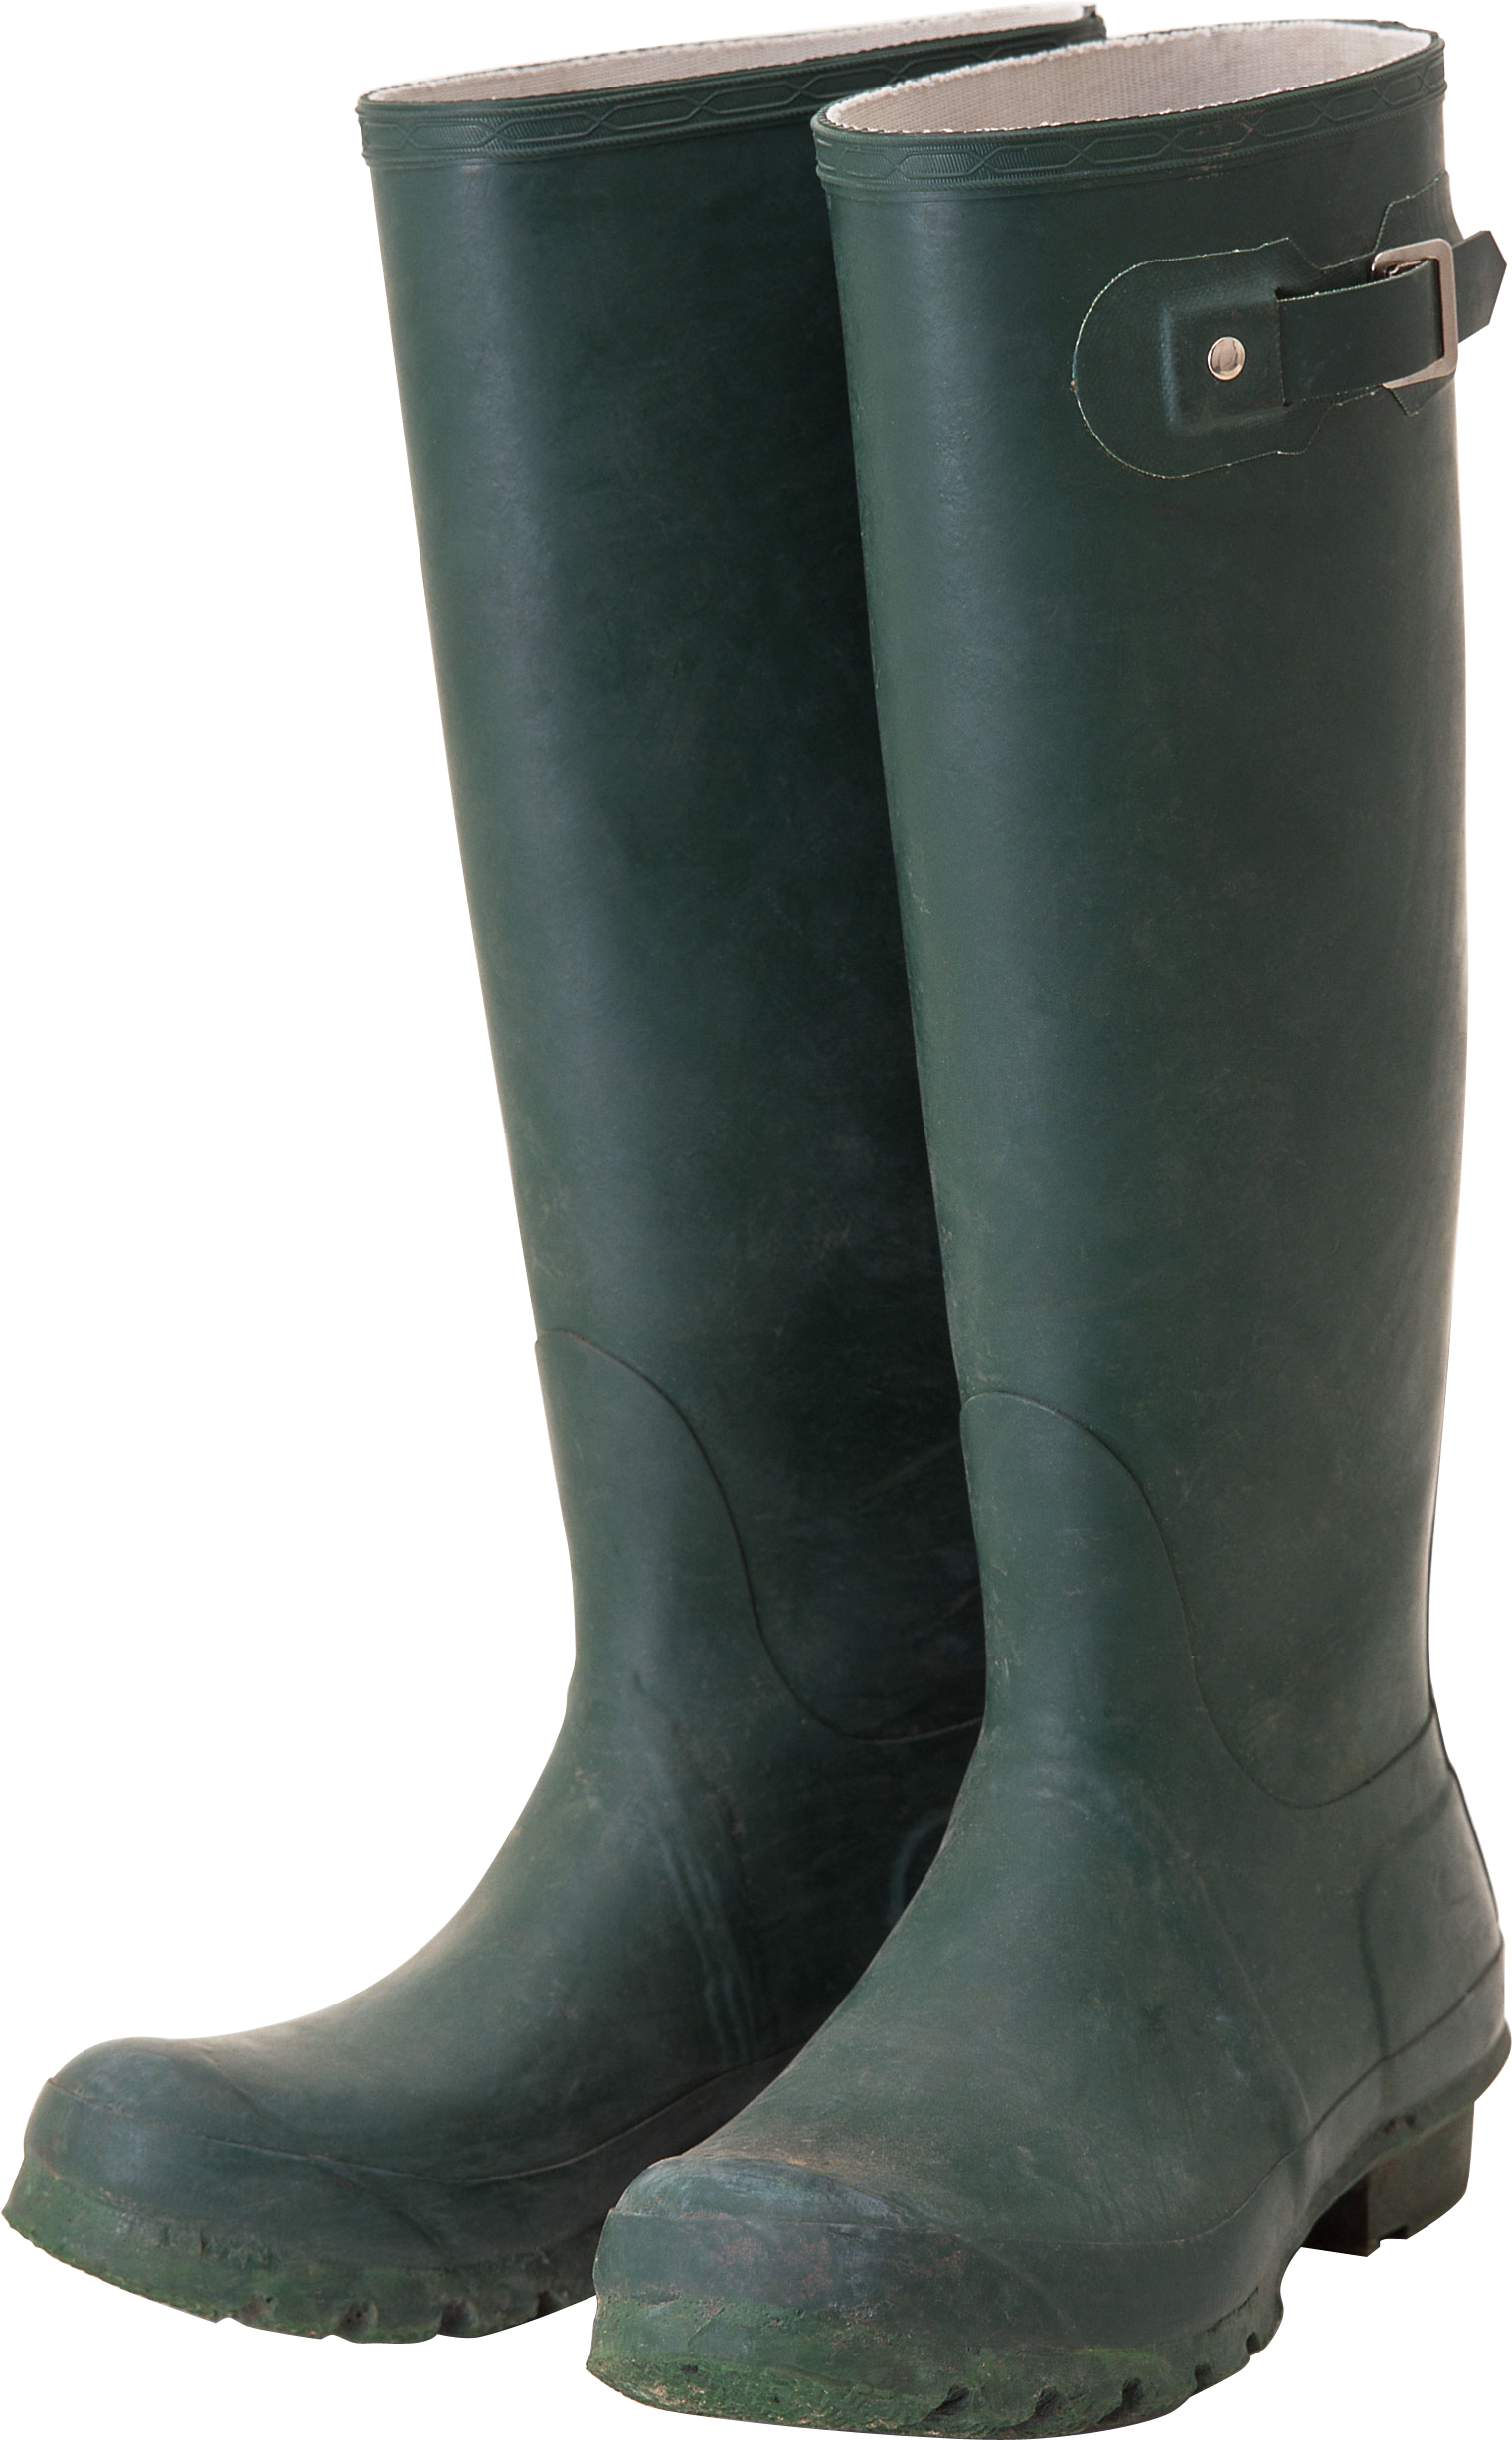 Rubber Boots PNG HD - 121429